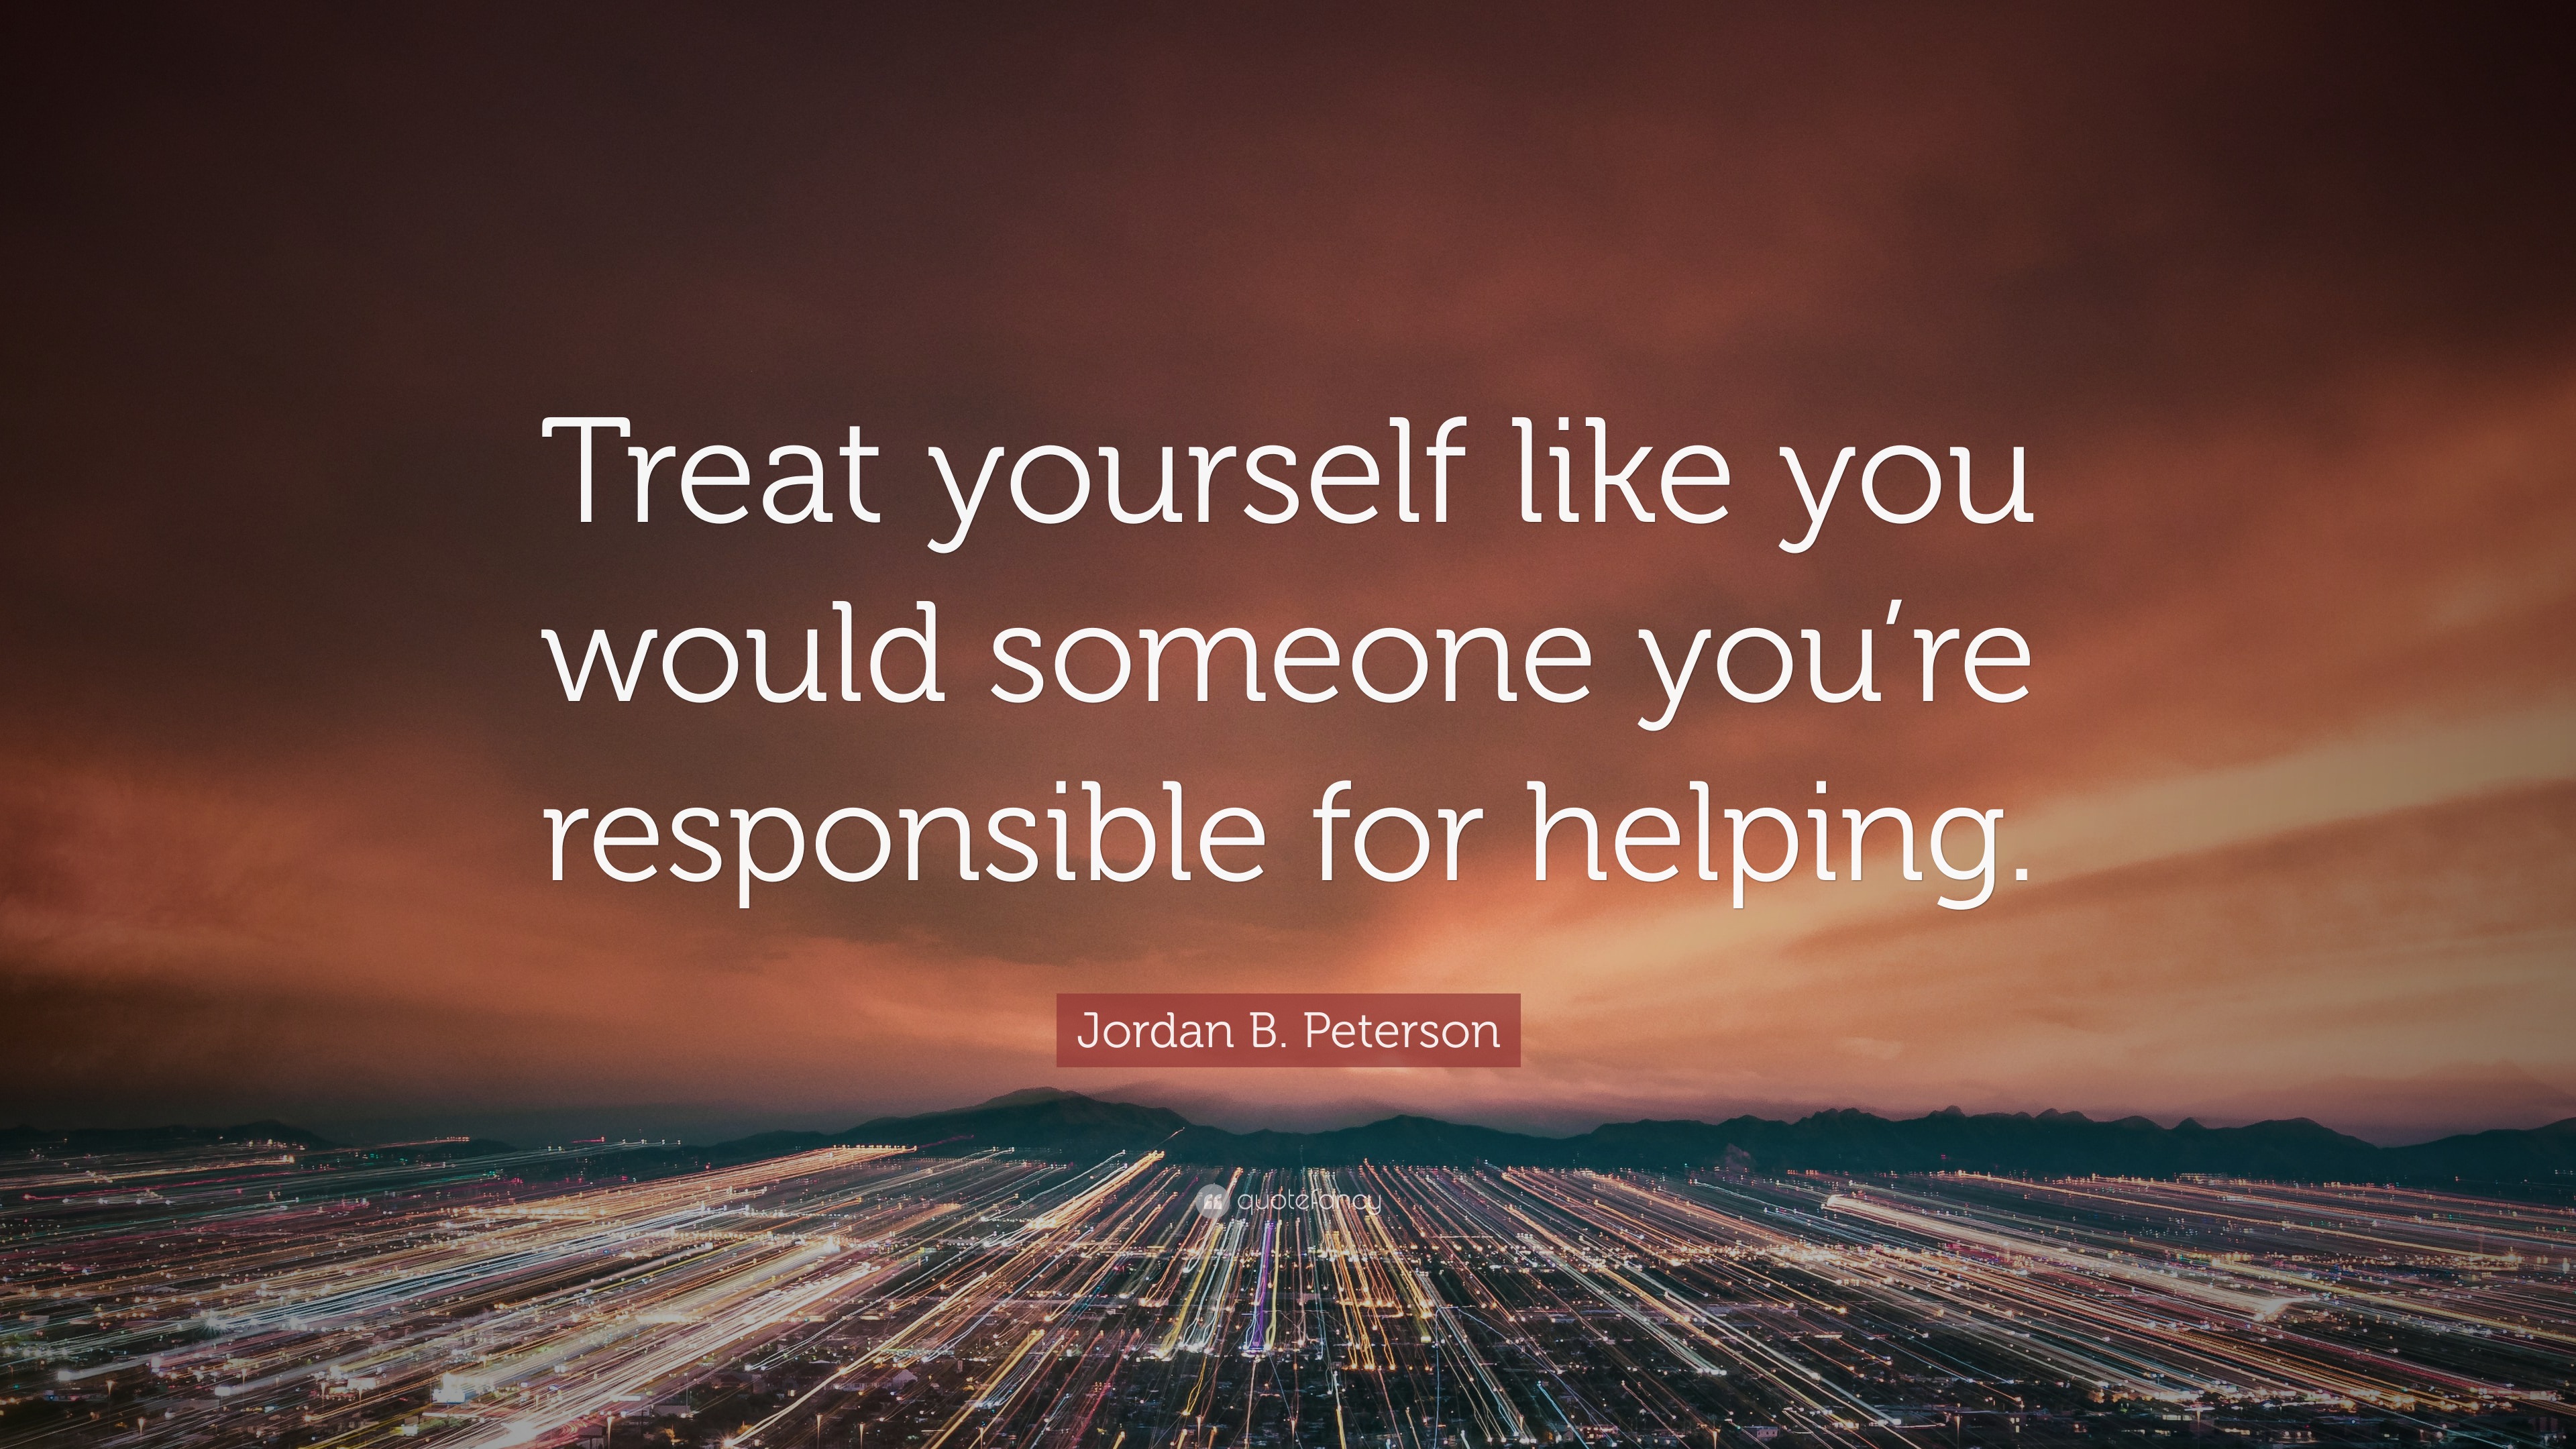 Jordan B. Peterson Quote: “Treat yourself like you would someone you're responsible helping.”